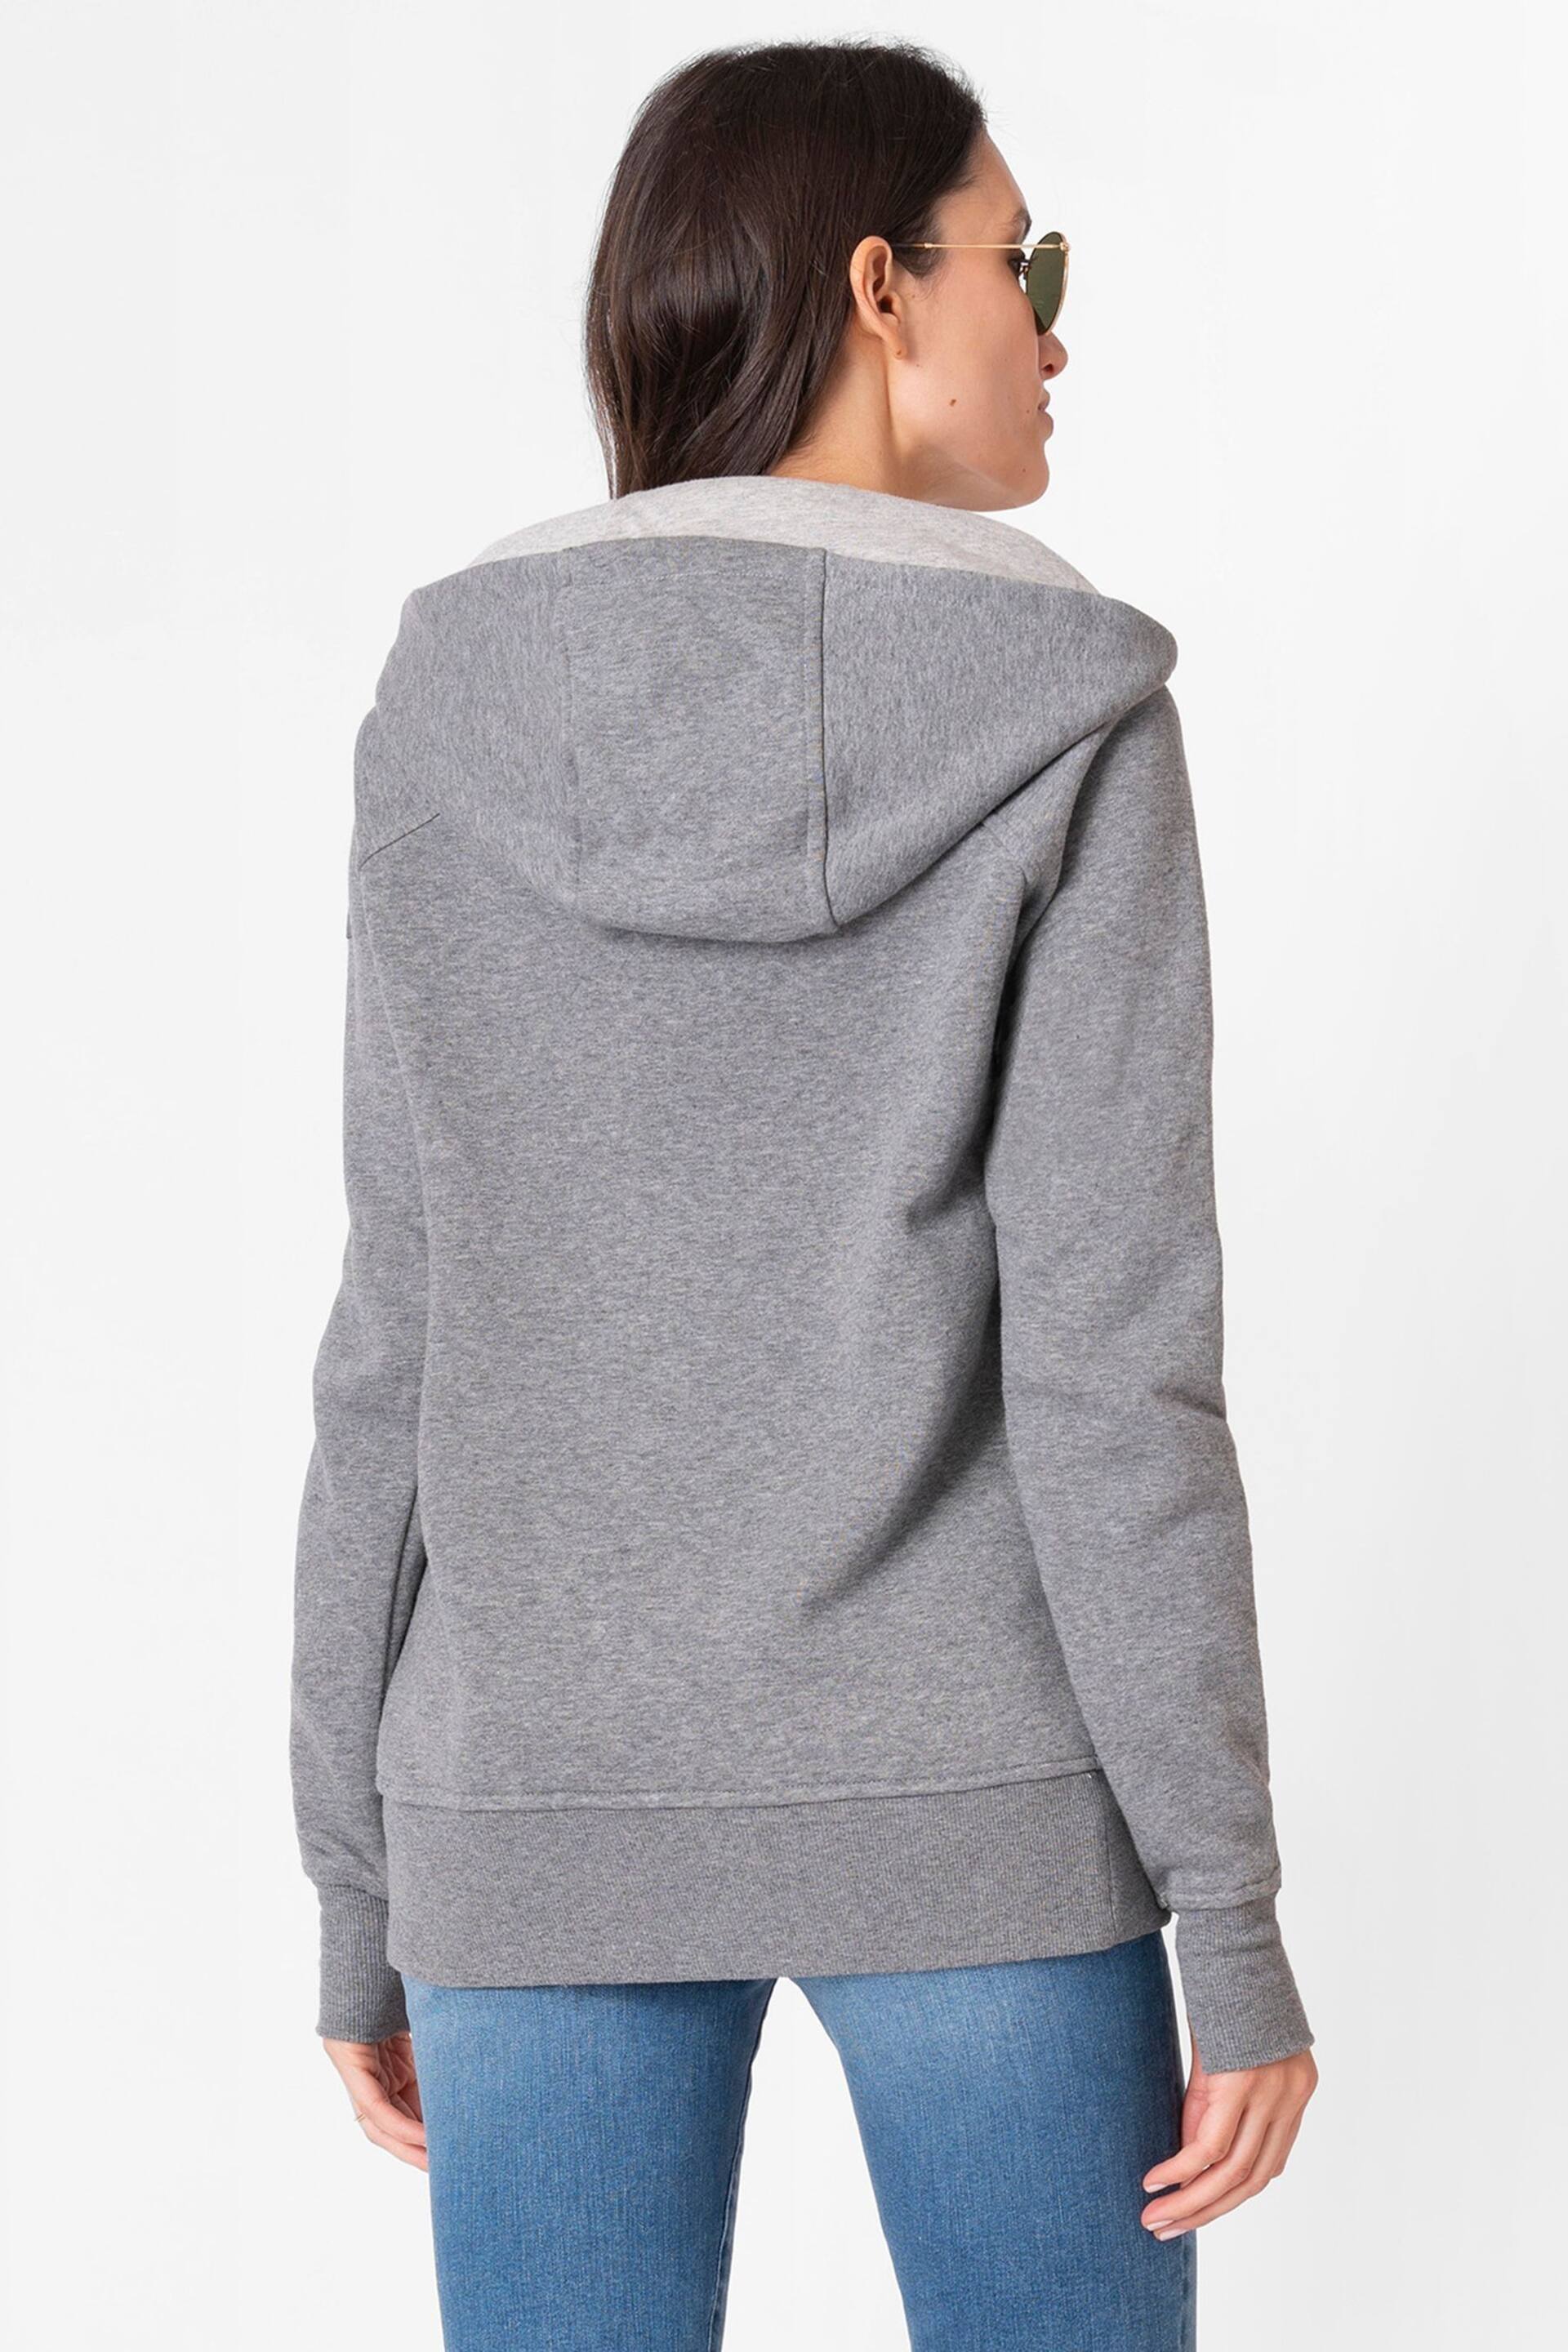 Seraphine Grey Cotton Blend 3 in 1 Maternity Hoodie - Image 3 of 5